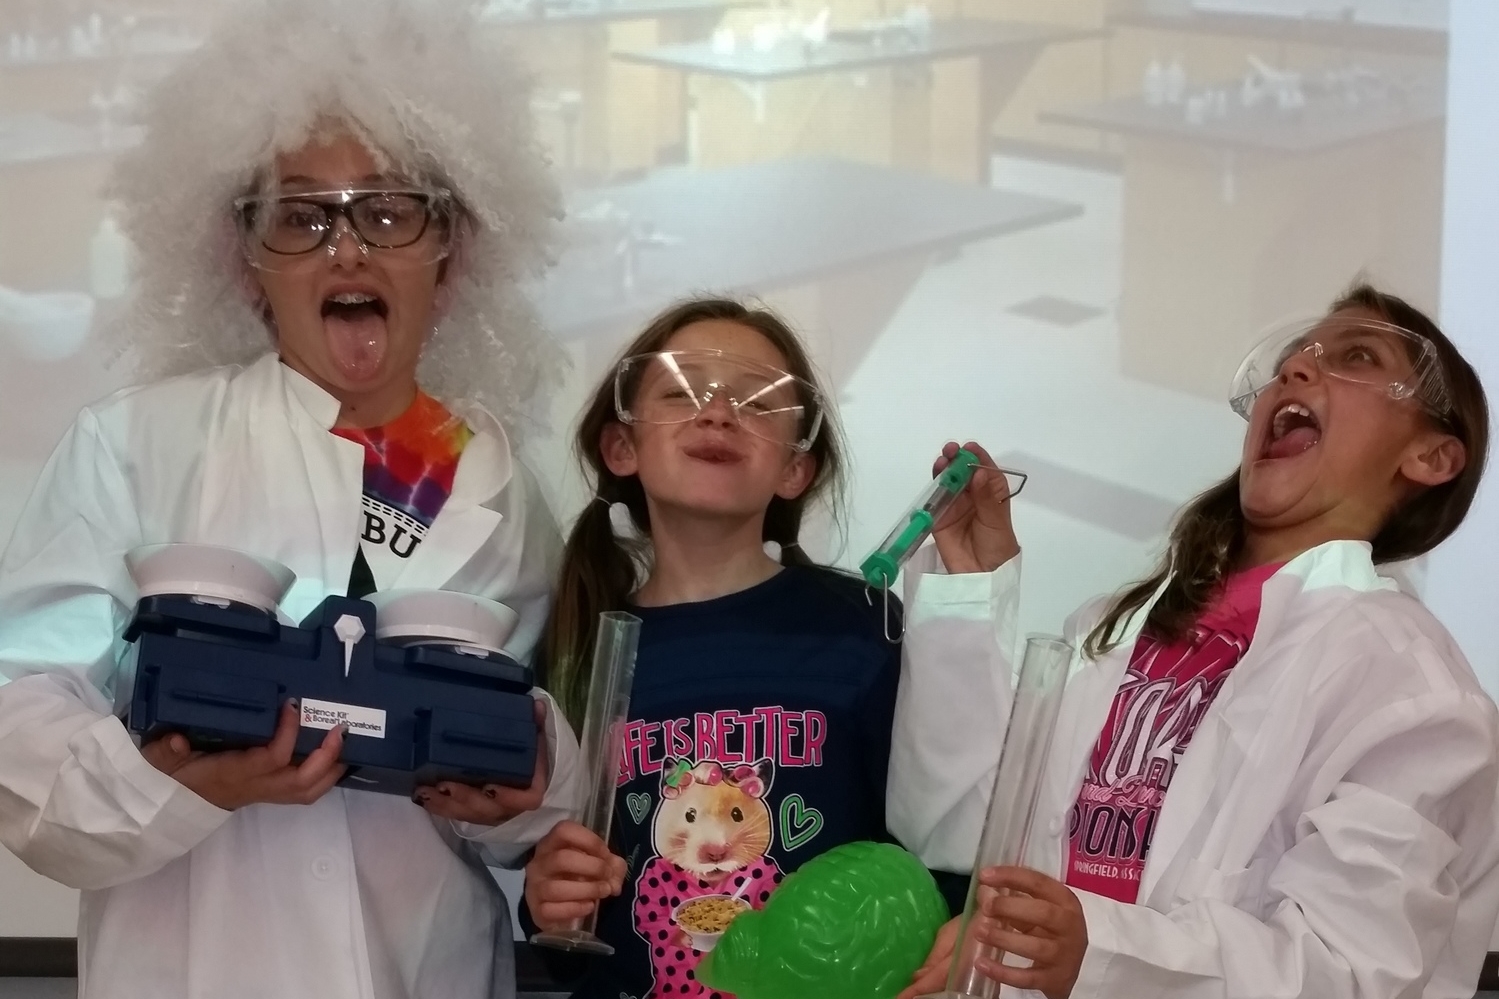 g4g Day@New York 2014 – Launch with "Trick-or-treat for Science"!- The mad scientists